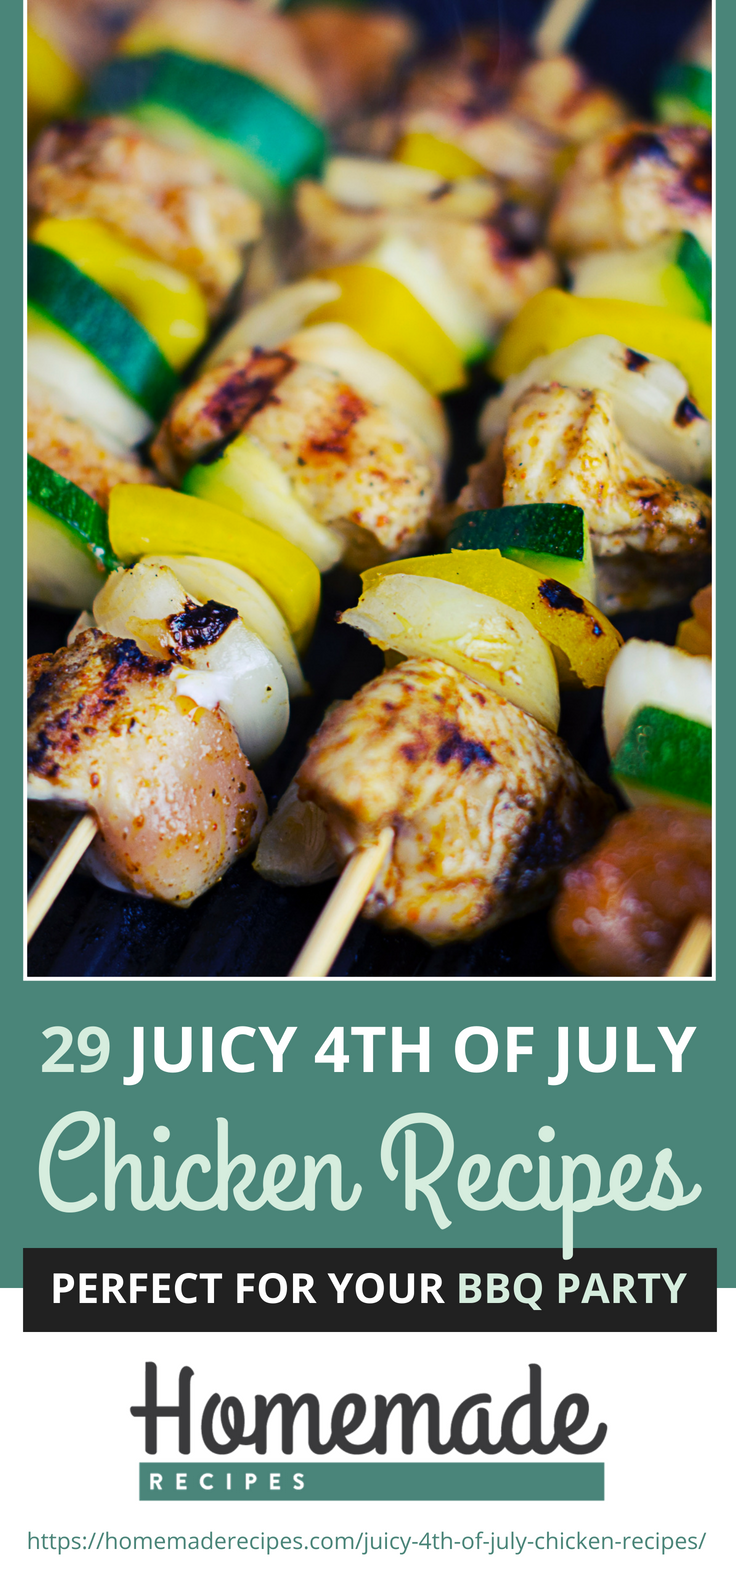 Pinterest Placard | 29 Juicy 4th Of July Chicken Recipes Perfect For Your BBQ Party | cooking recipes for chicken